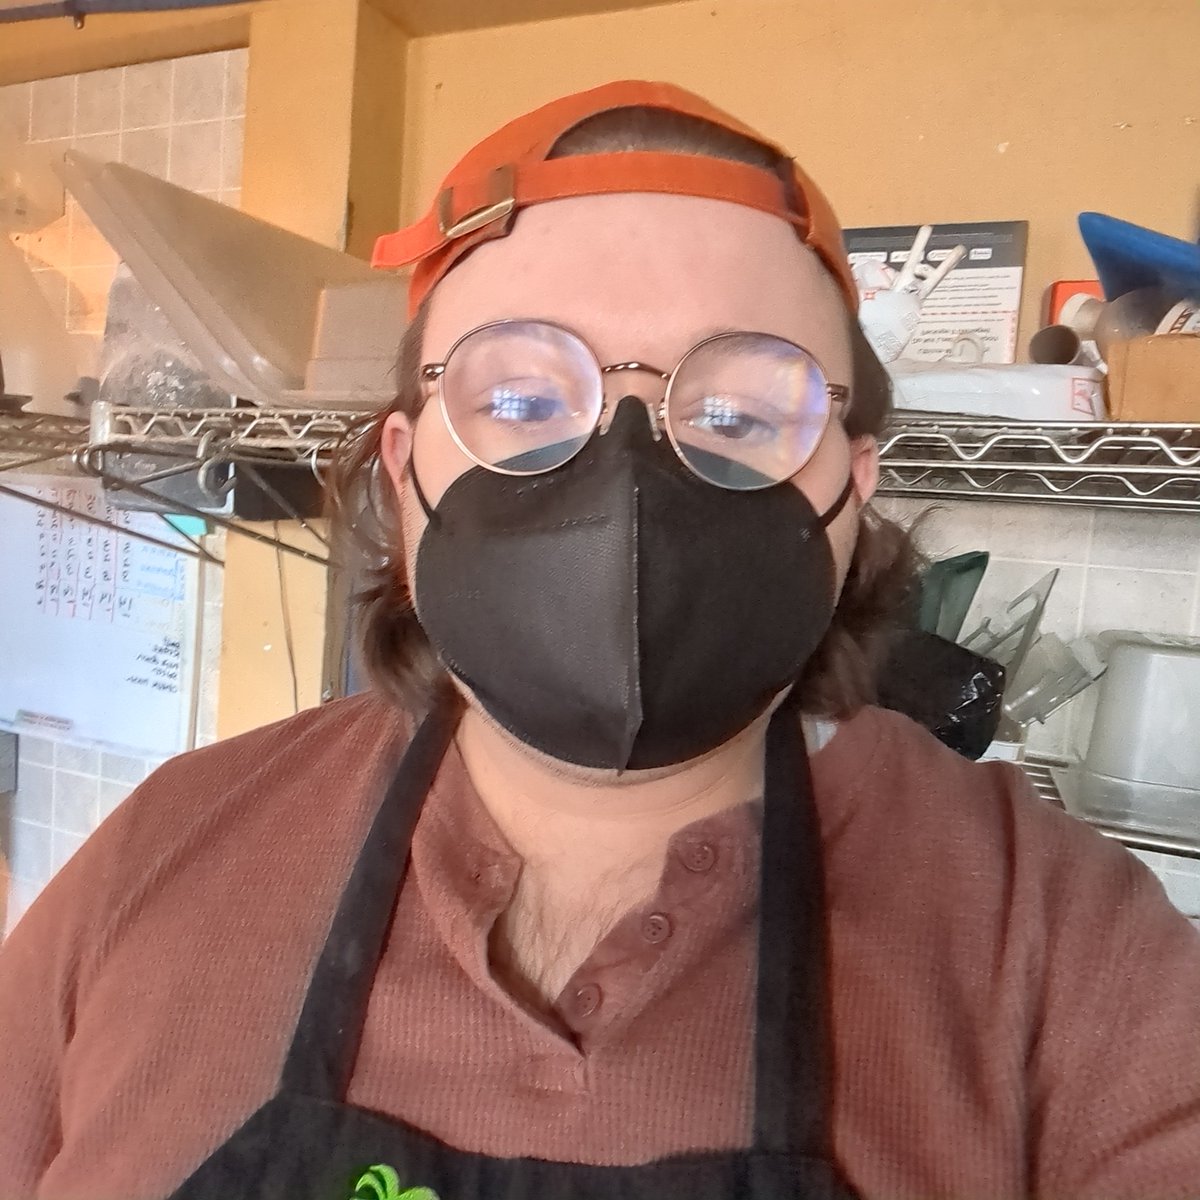 Paging #covidconscious folks, I need help finding new, better fitting respirators. I have a hard time finding ones that fit my rounder face and don't leave gaps. The ones I'm wearing rn don't give a great deal but I don't make a lot of money and I can get them at the grocery.